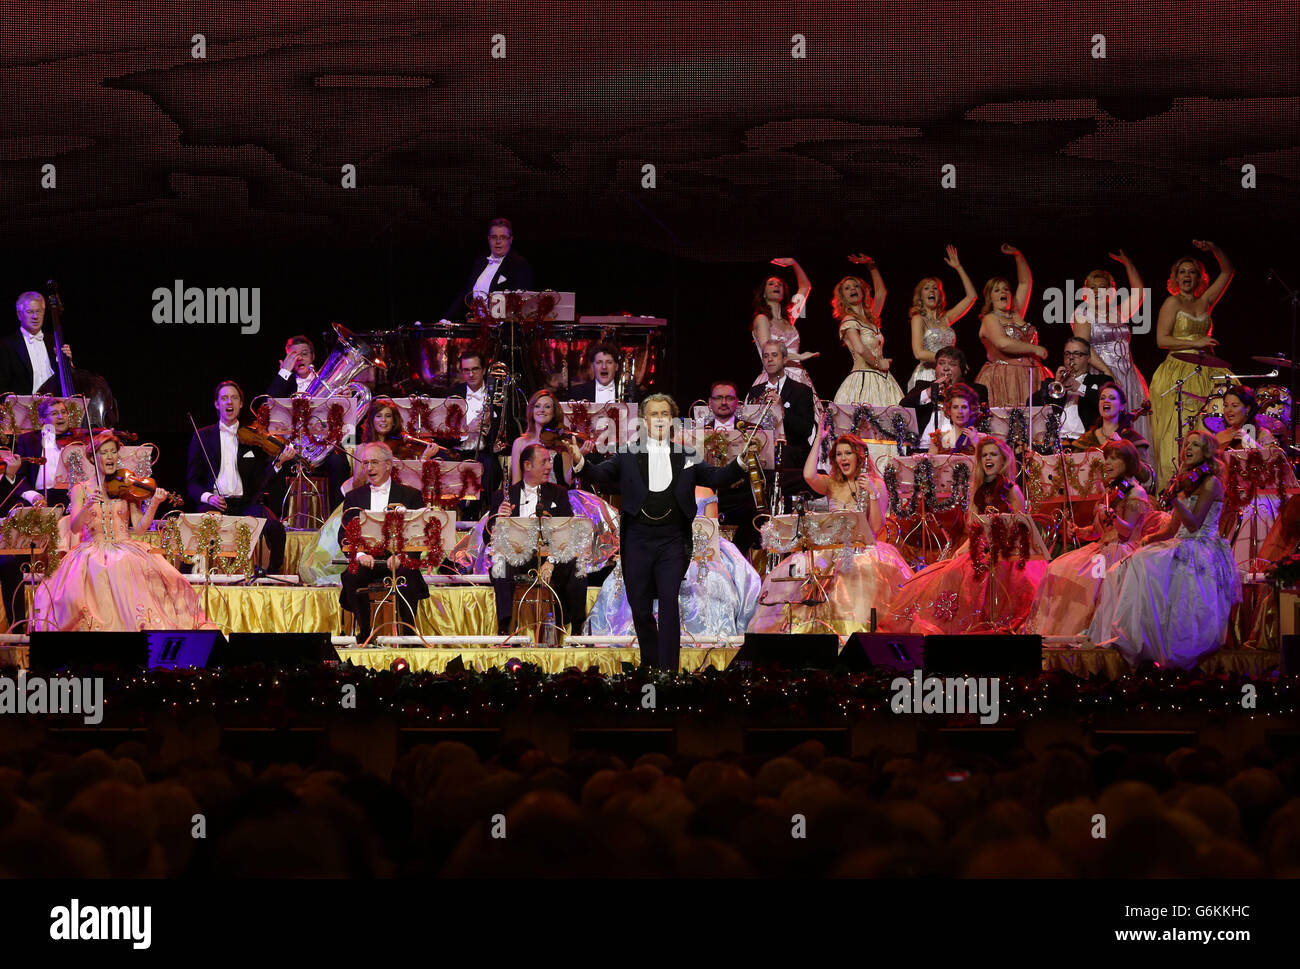 Andre Rieu performance - London. Dutch violinist and conductor Andre Rieu performs at Wembley Arena, London. Stock Photo